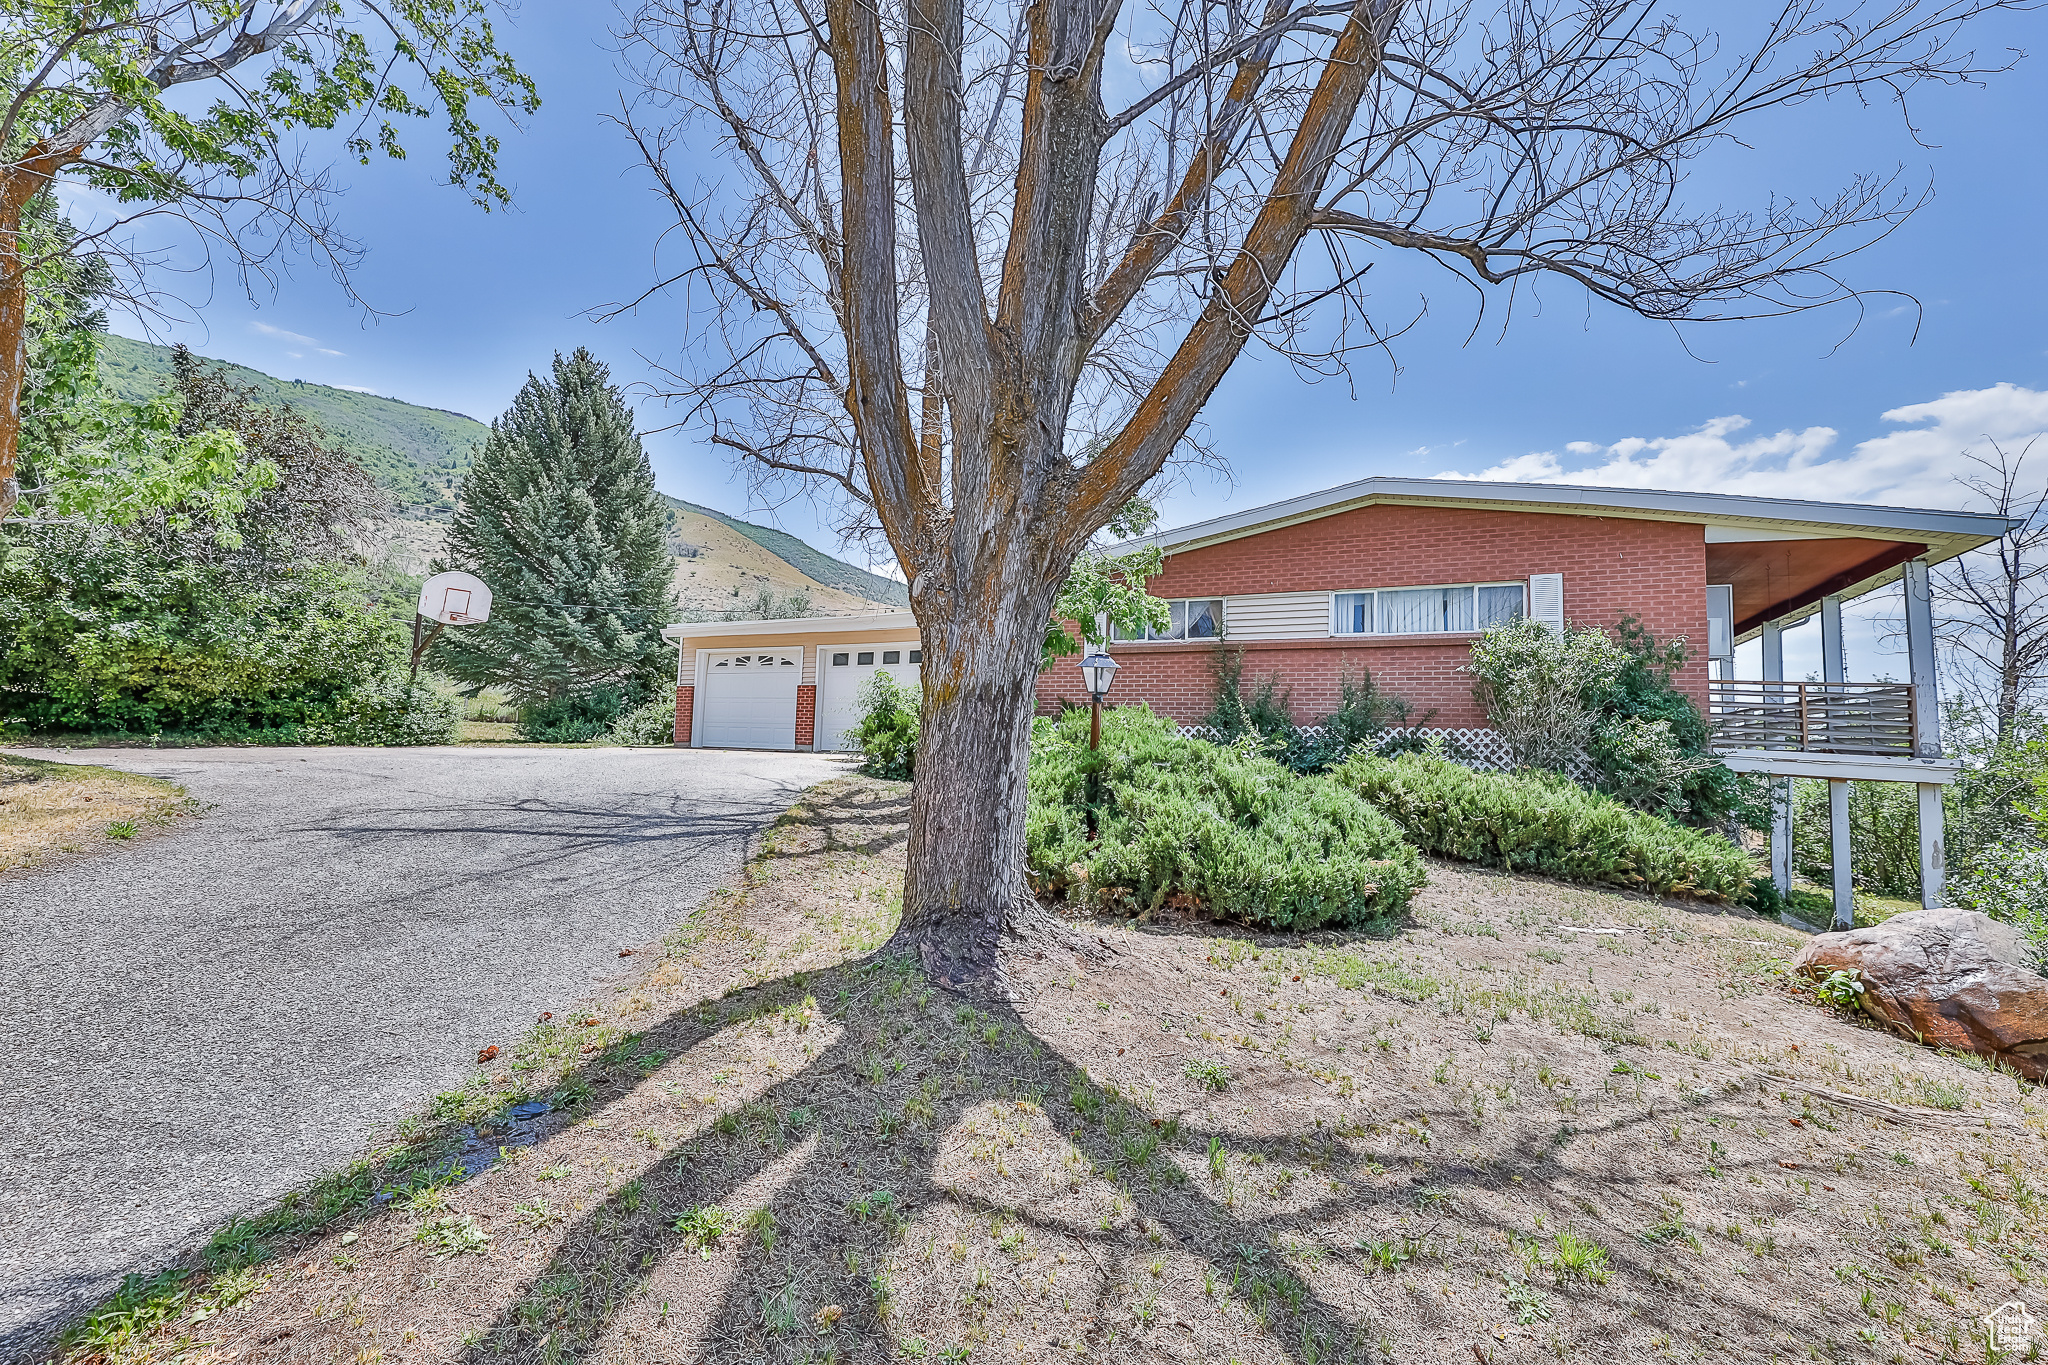 1392 E OAKMONT, Fruit Heights, Utah 84037, 4 Bedrooms Bedrooms, 10 Rooms Rooms,1 BathroomBathrooms,Residential,For sale,OAKMONT,1986547